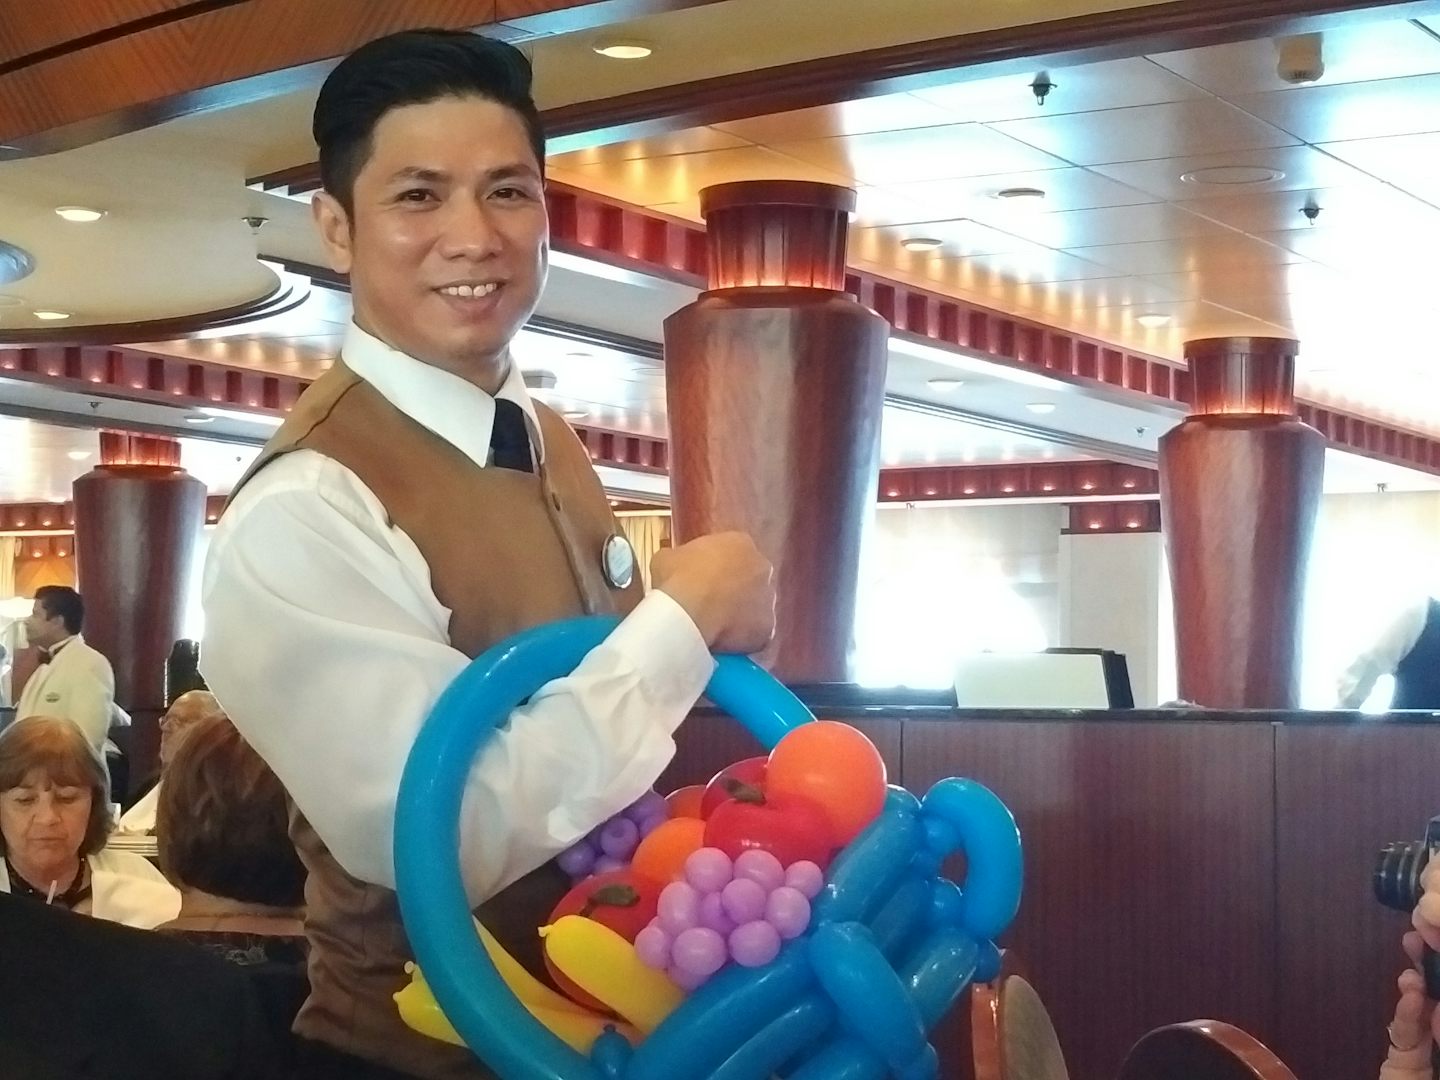 Jimmy, our waiter, made a fruit basket for our table - all out of balloon!